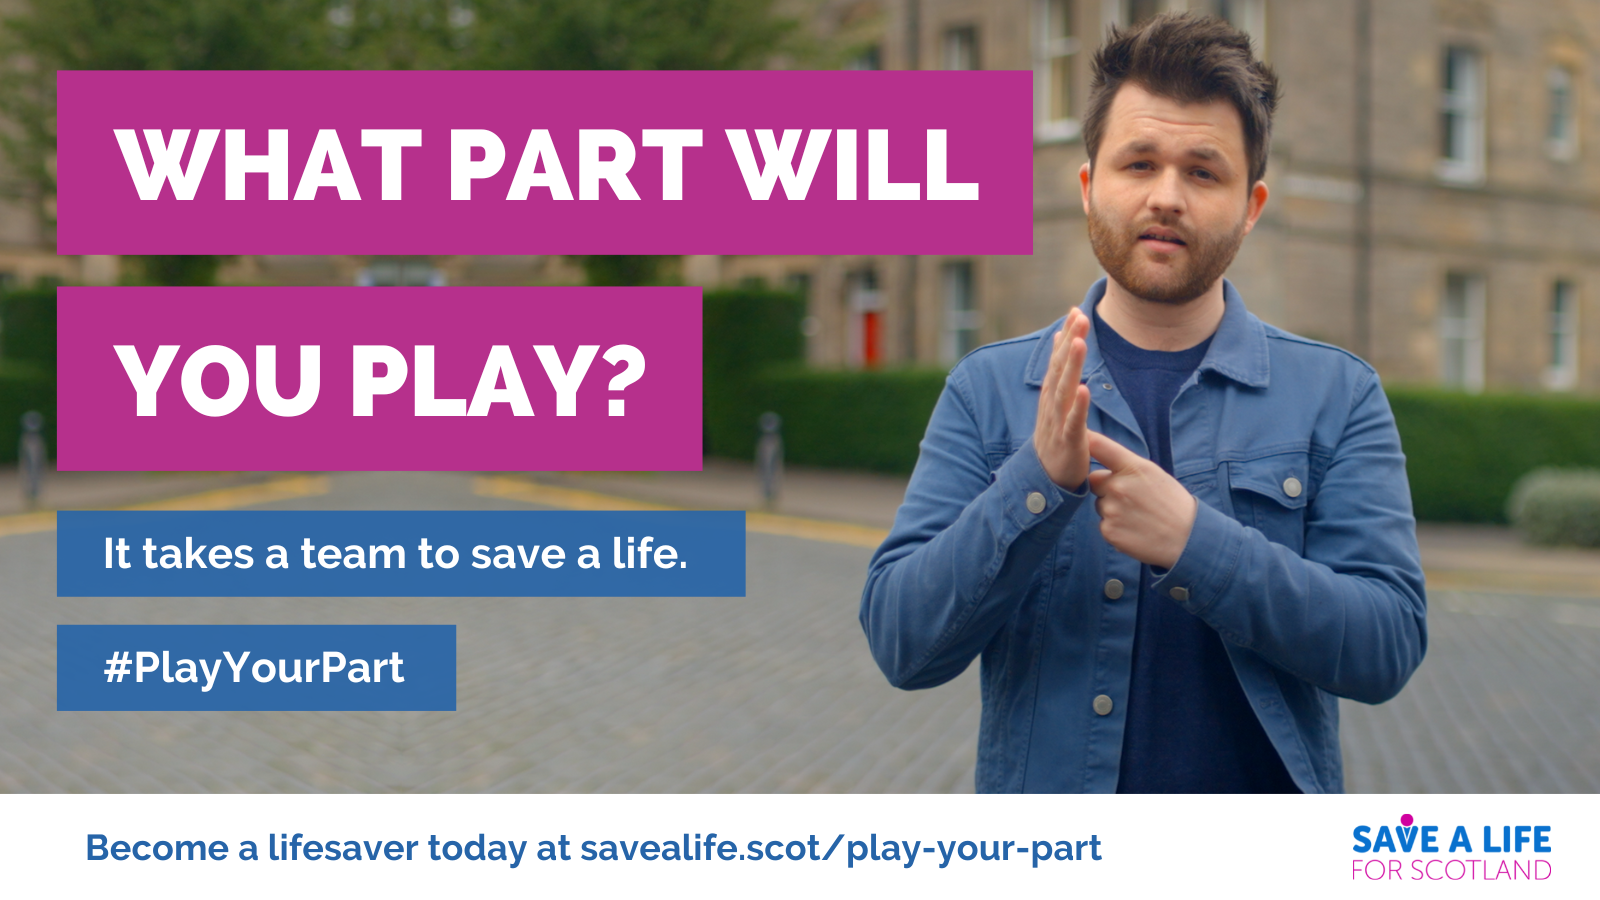 Image of a man using BSL standing in front of a block of flats that have hedges and trees around. Heading text: What part will you play? Other text: It takes a team to save a life. Hashtag PlayYourPart. Become a lifesaver today at savealife.scot/play-your-part. Save a Life for Scotland logo.